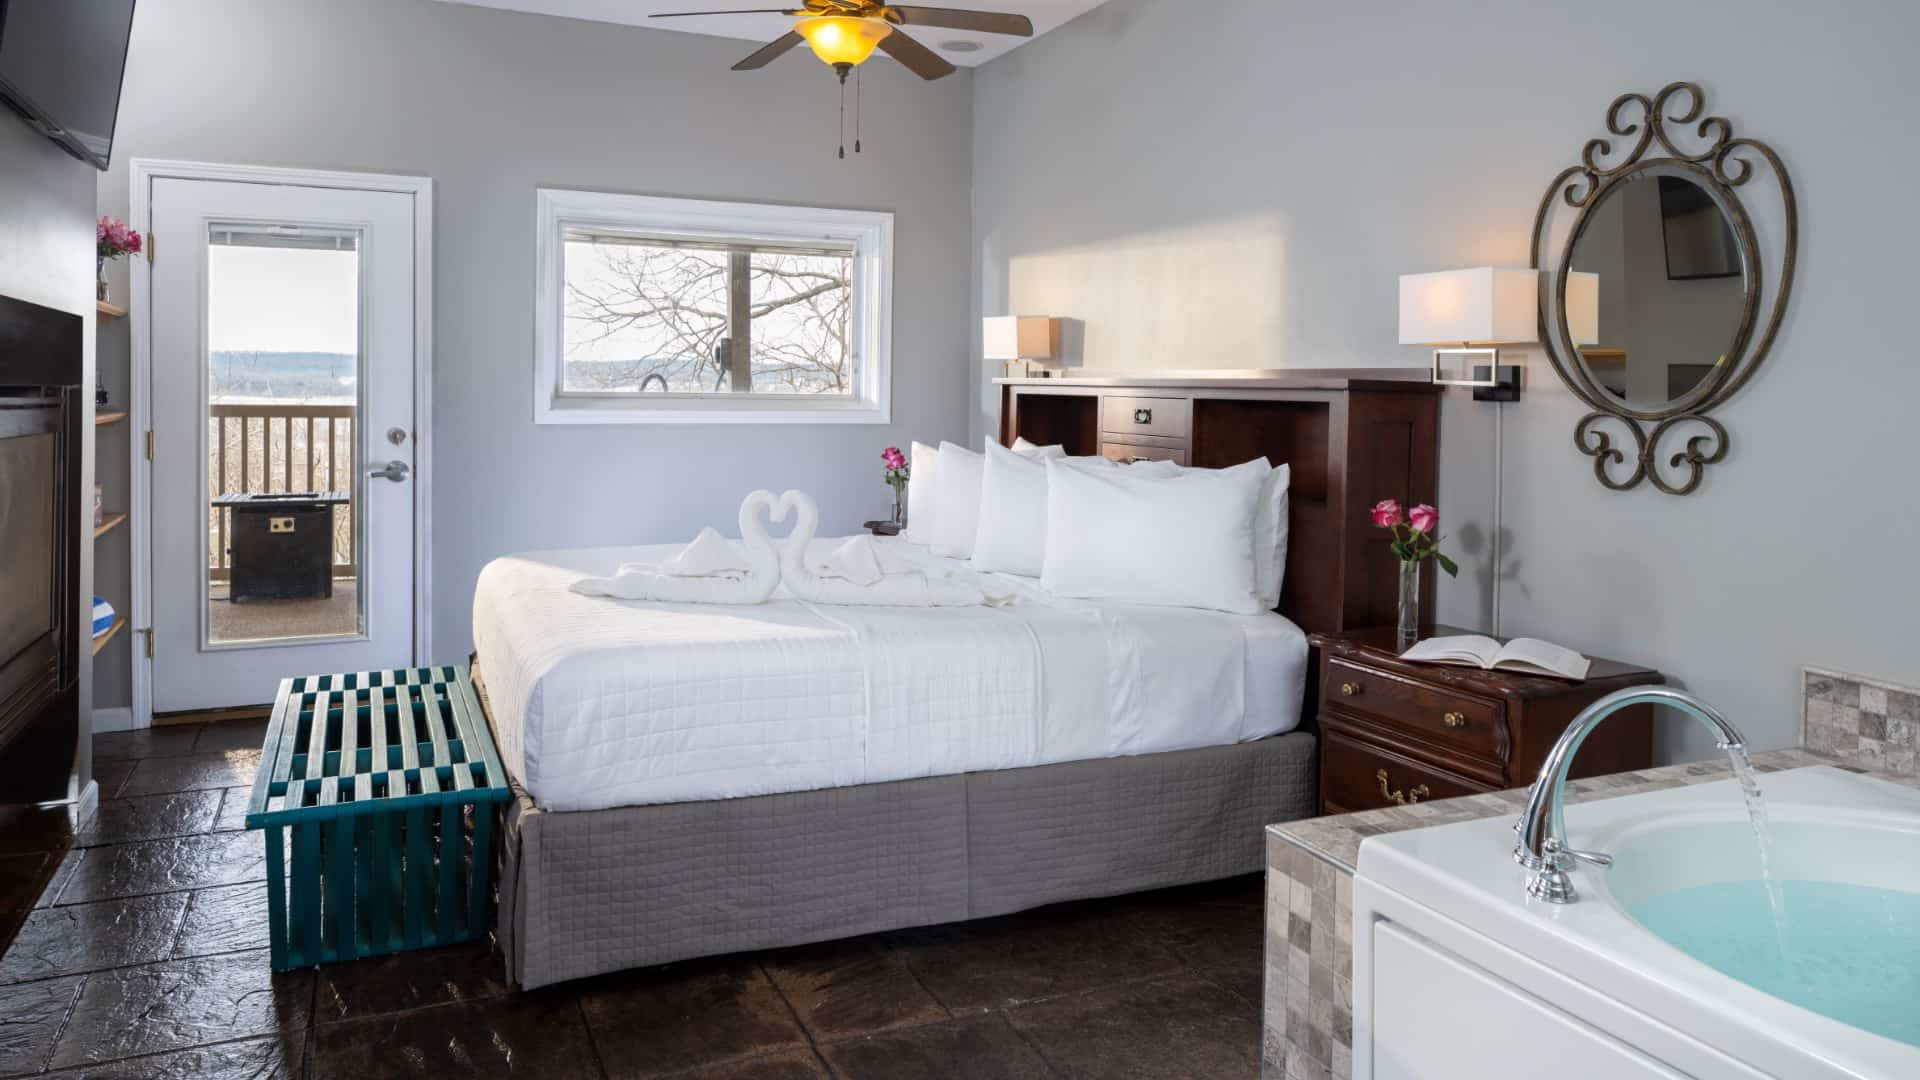 Large bedroom suite with light gray walls, tiled flooring, wooden headboard, white bedding, fireplace, and jetted tub